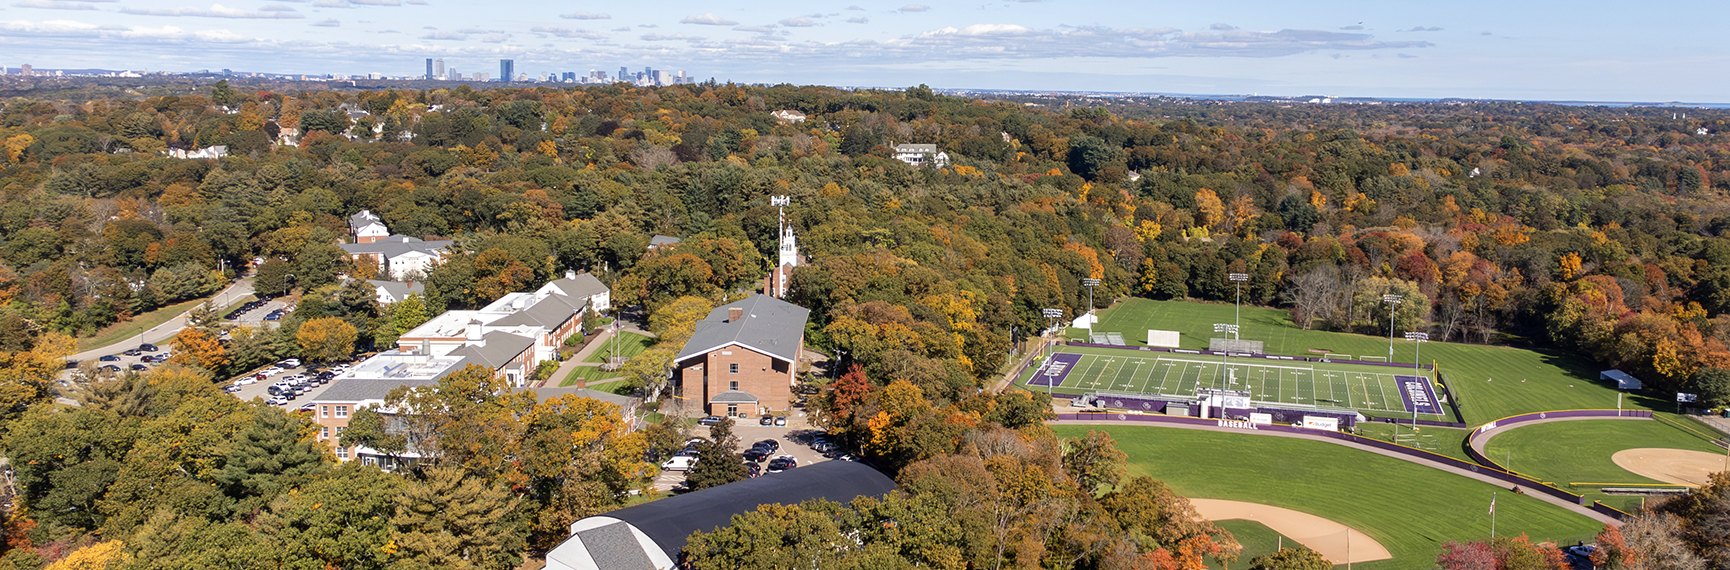 Curry College campus from above